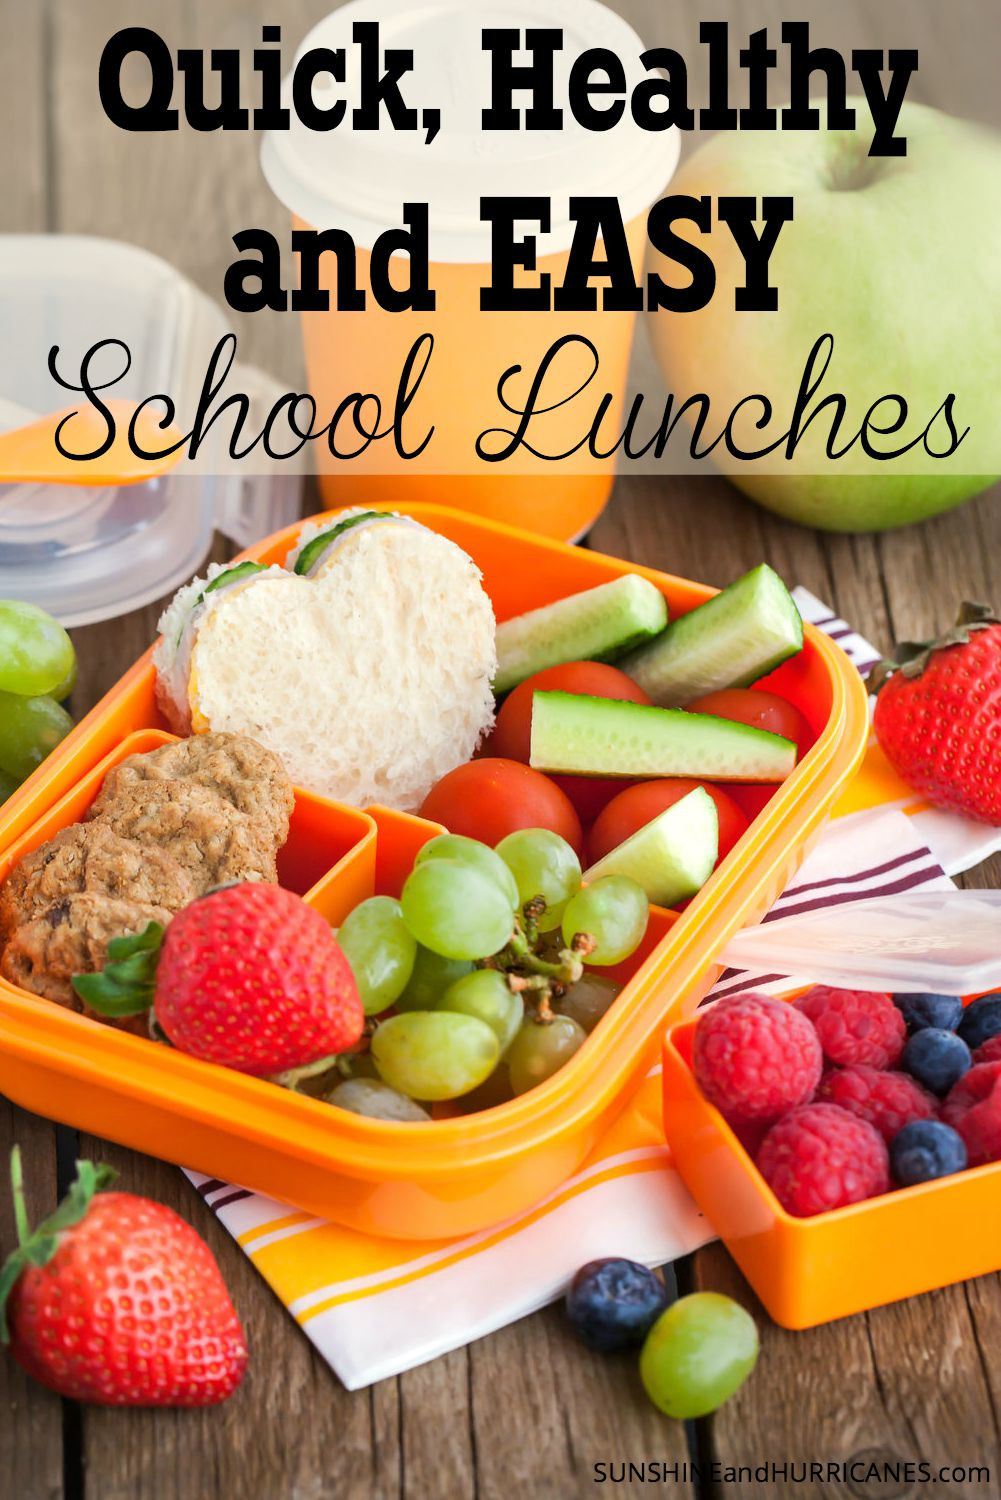 Easy Healthy School Lunches
 Healthy Quick and Easy School Lunches